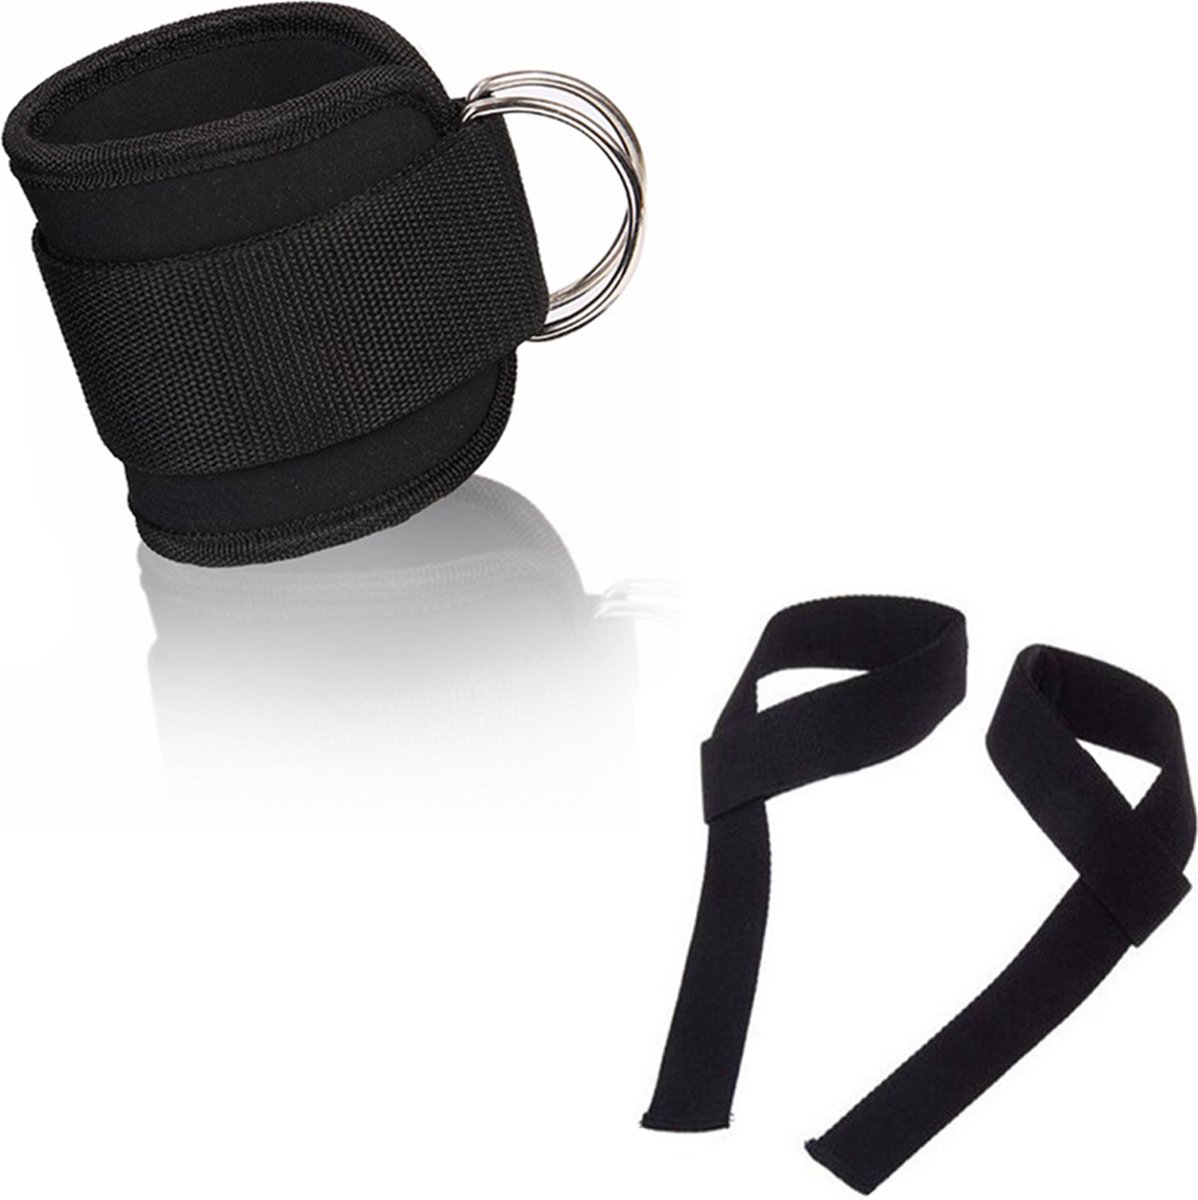 ExclusivX - enkelband fitness & Lifting straps - ankle strap +- Voordeelverpakking - ankle strap fitness - enkel strap - ankle brace - 1 ankle strap - 2 lifting straps